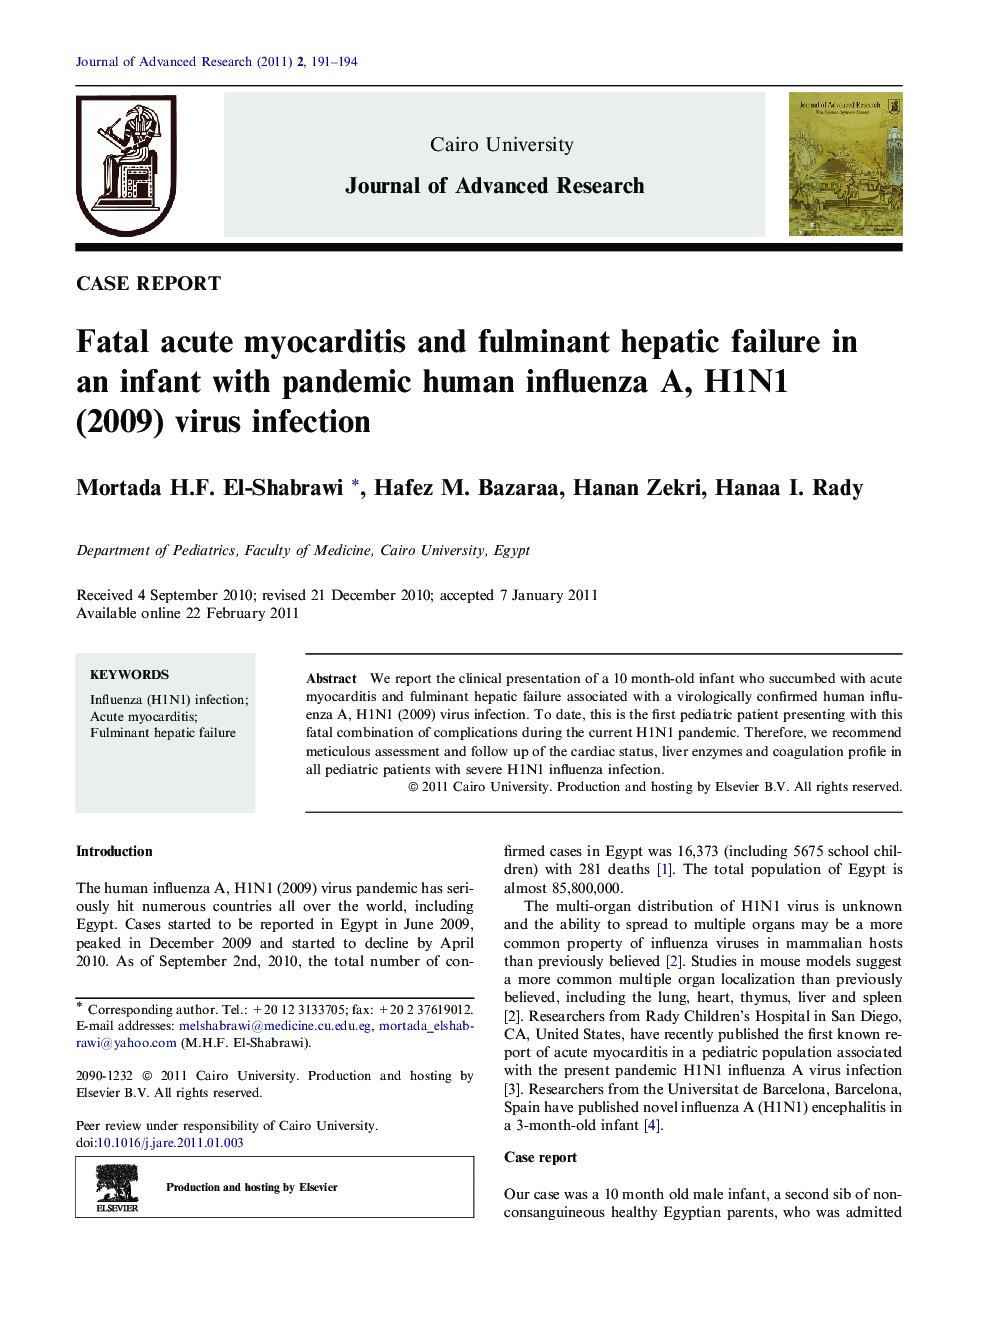 Fatal acute myocarditis and fulminant hepatic failure in an infant with pandemic human influenza A, H1N1 (2009) virus infection